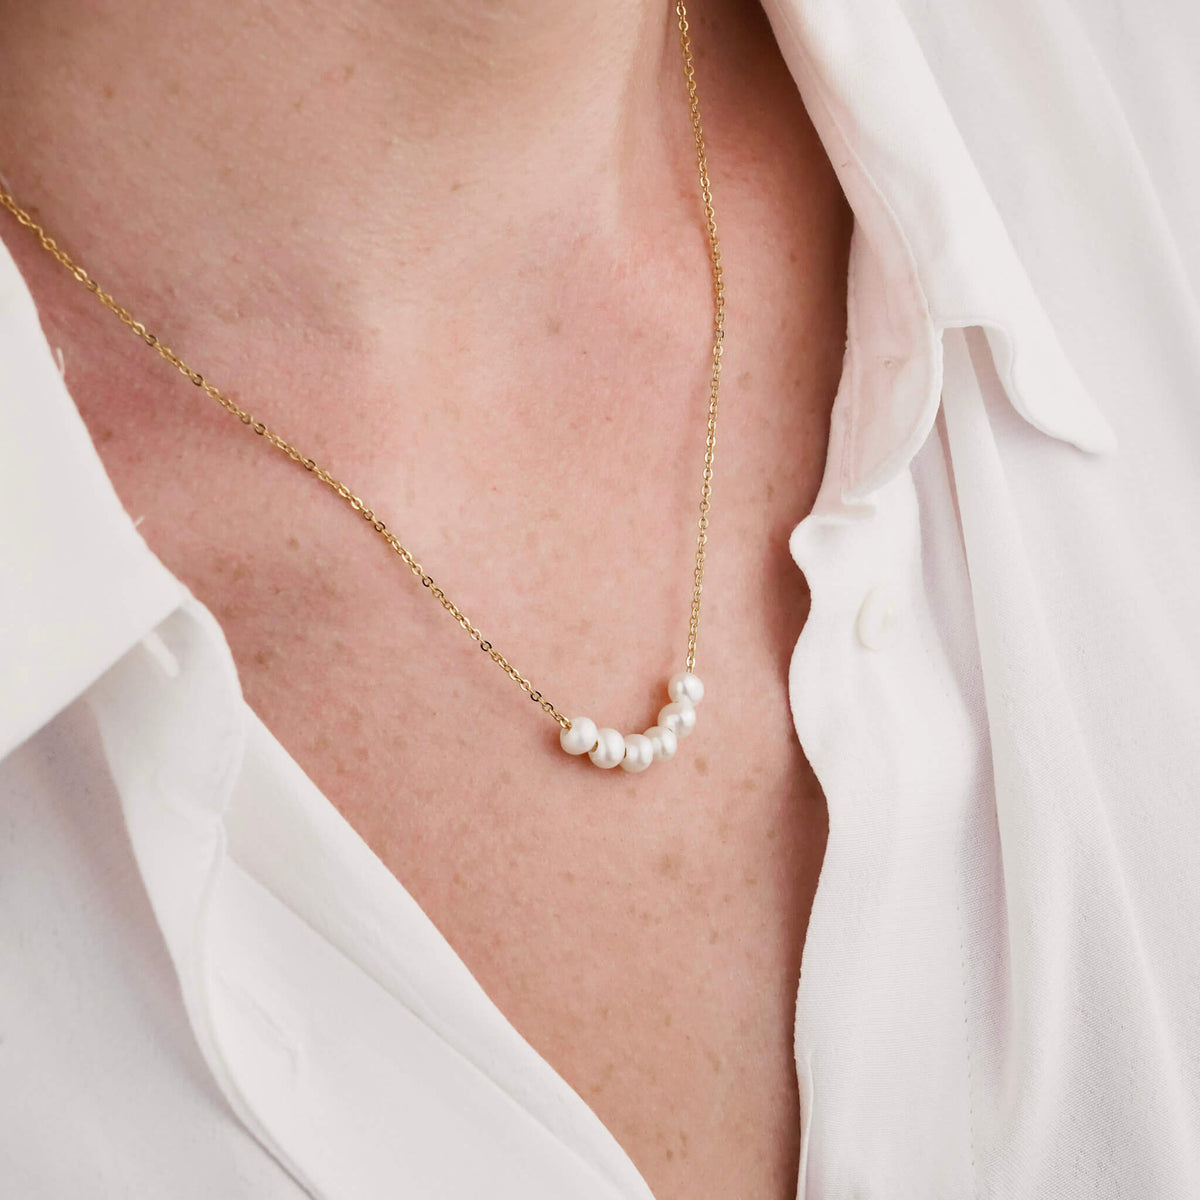 the model is wearing a pearl necklace.  the necklace is elegant and timeless. it has a dainty gold chain which holds 6 fresh water pearls. the pearls can move freely along the chain. 